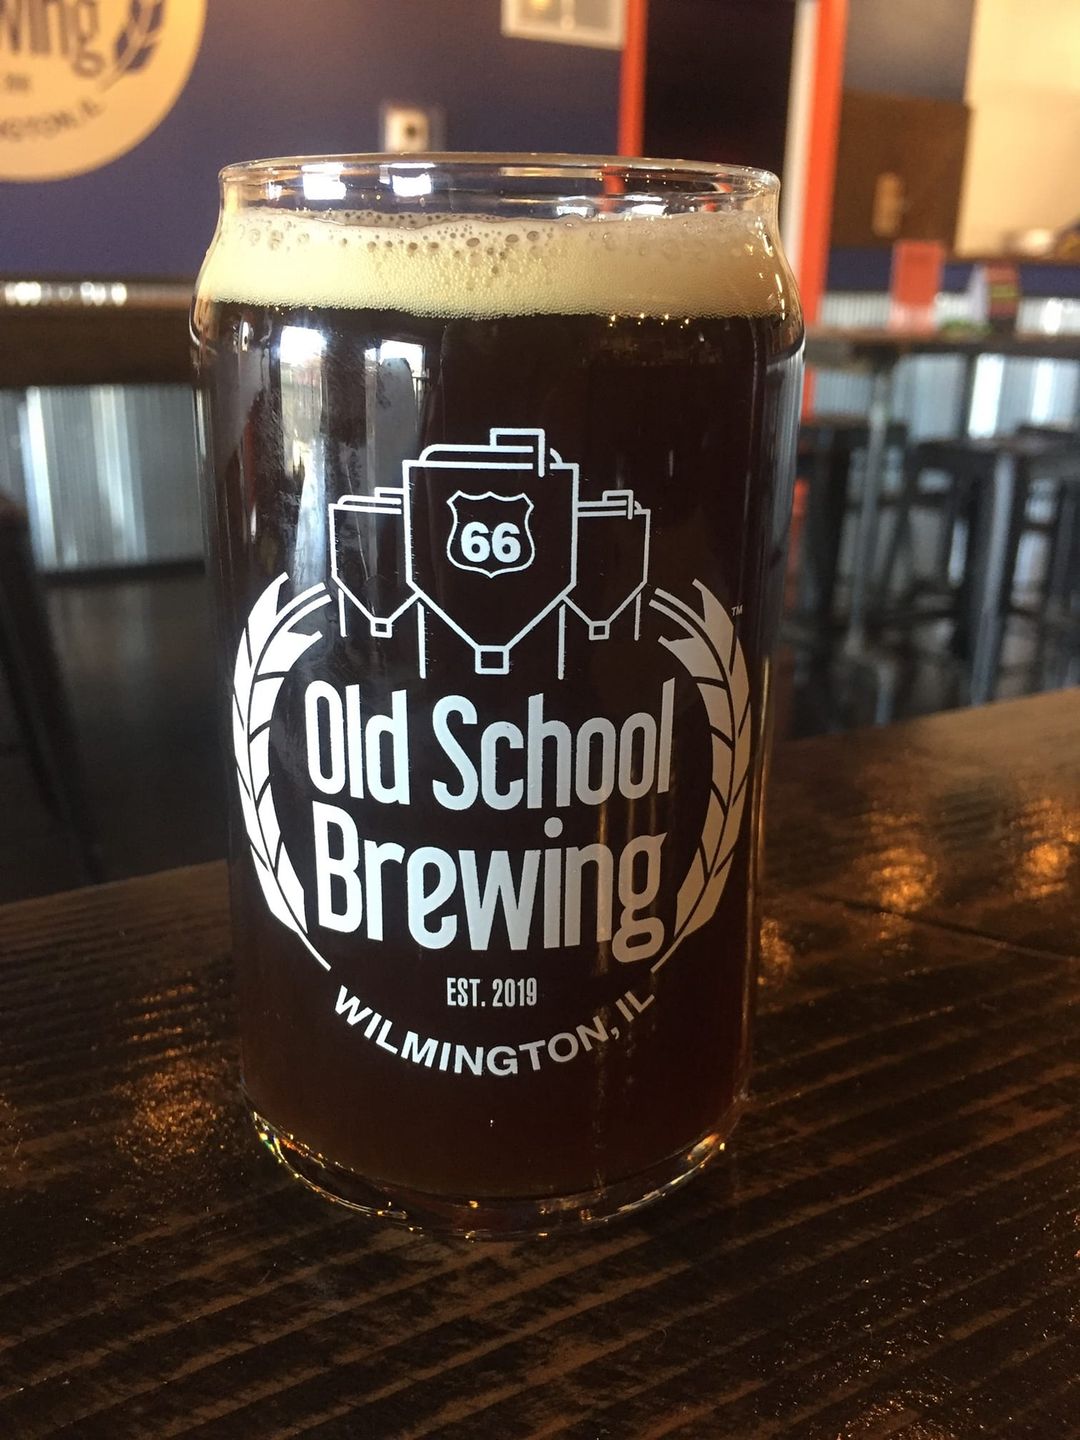 New in Town Brown, in a glass at Rt66 Old School brewing